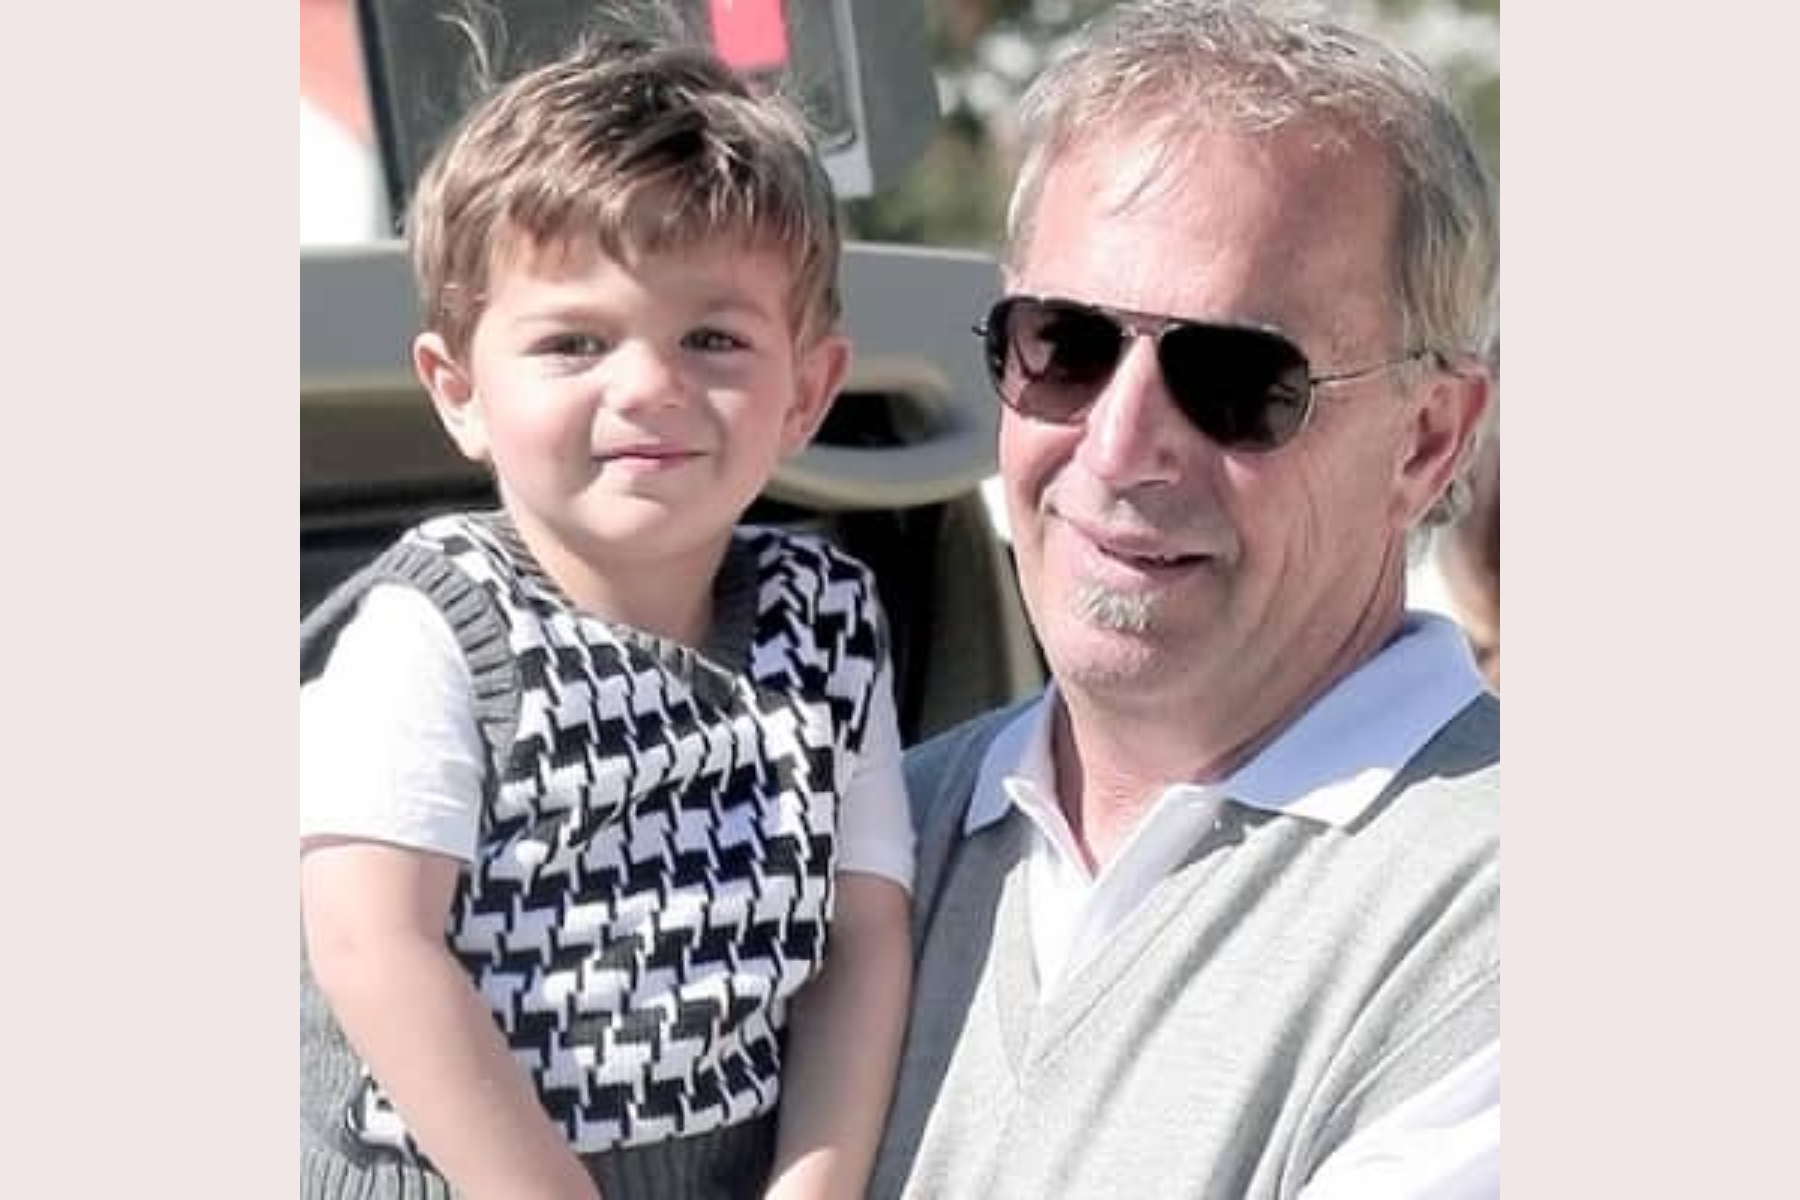 Kevin Costner lifts his son Hayes Costner